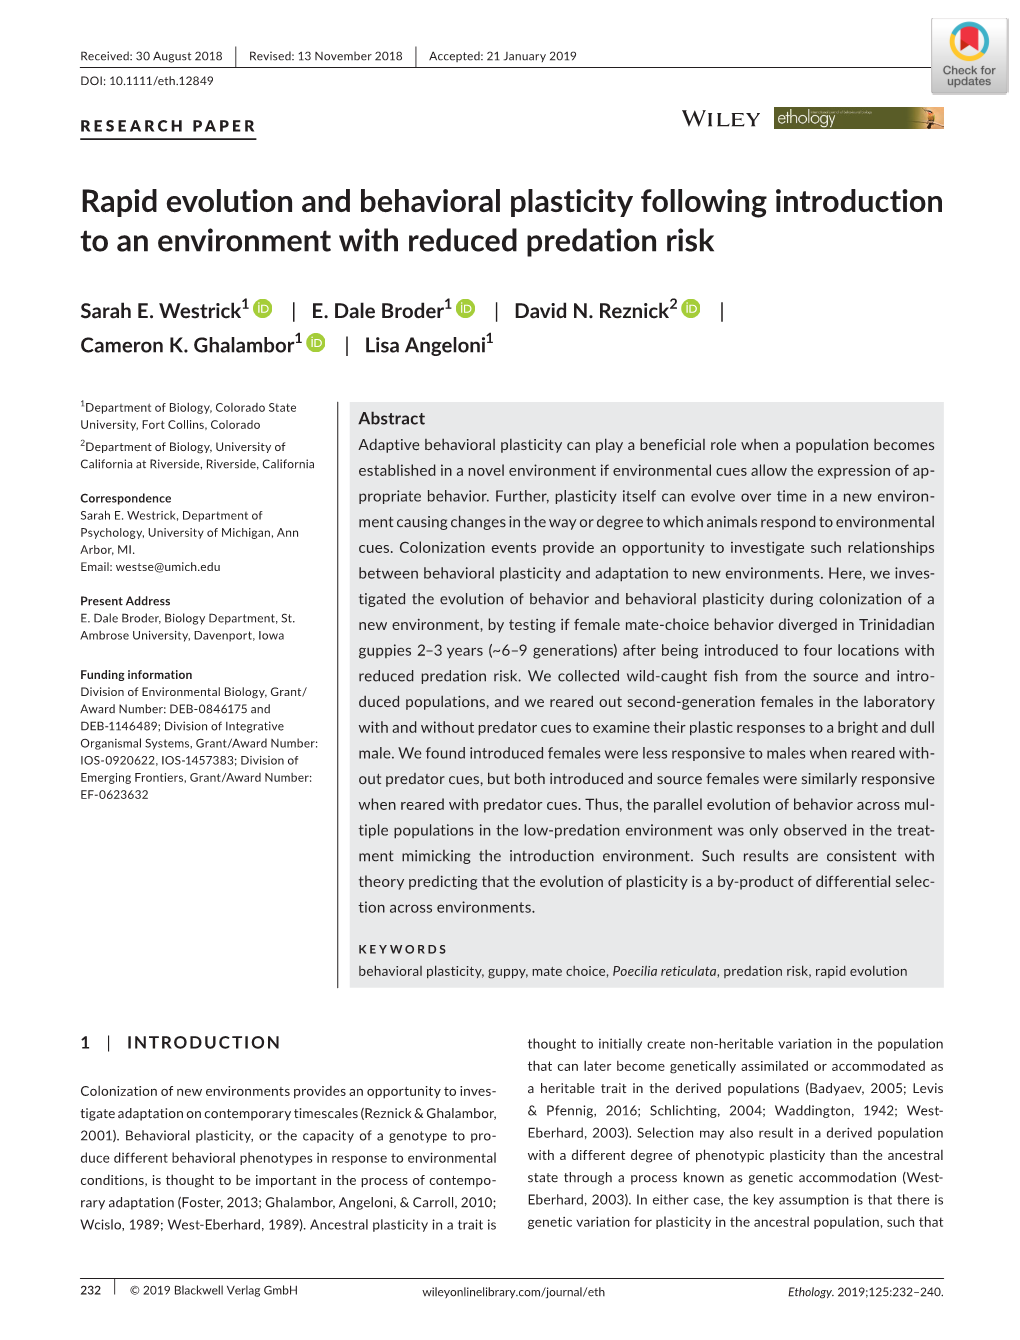 Rapid Evolution and Behavioral Plasticity Following Introduction to an Environment with Reduced Predation Risk